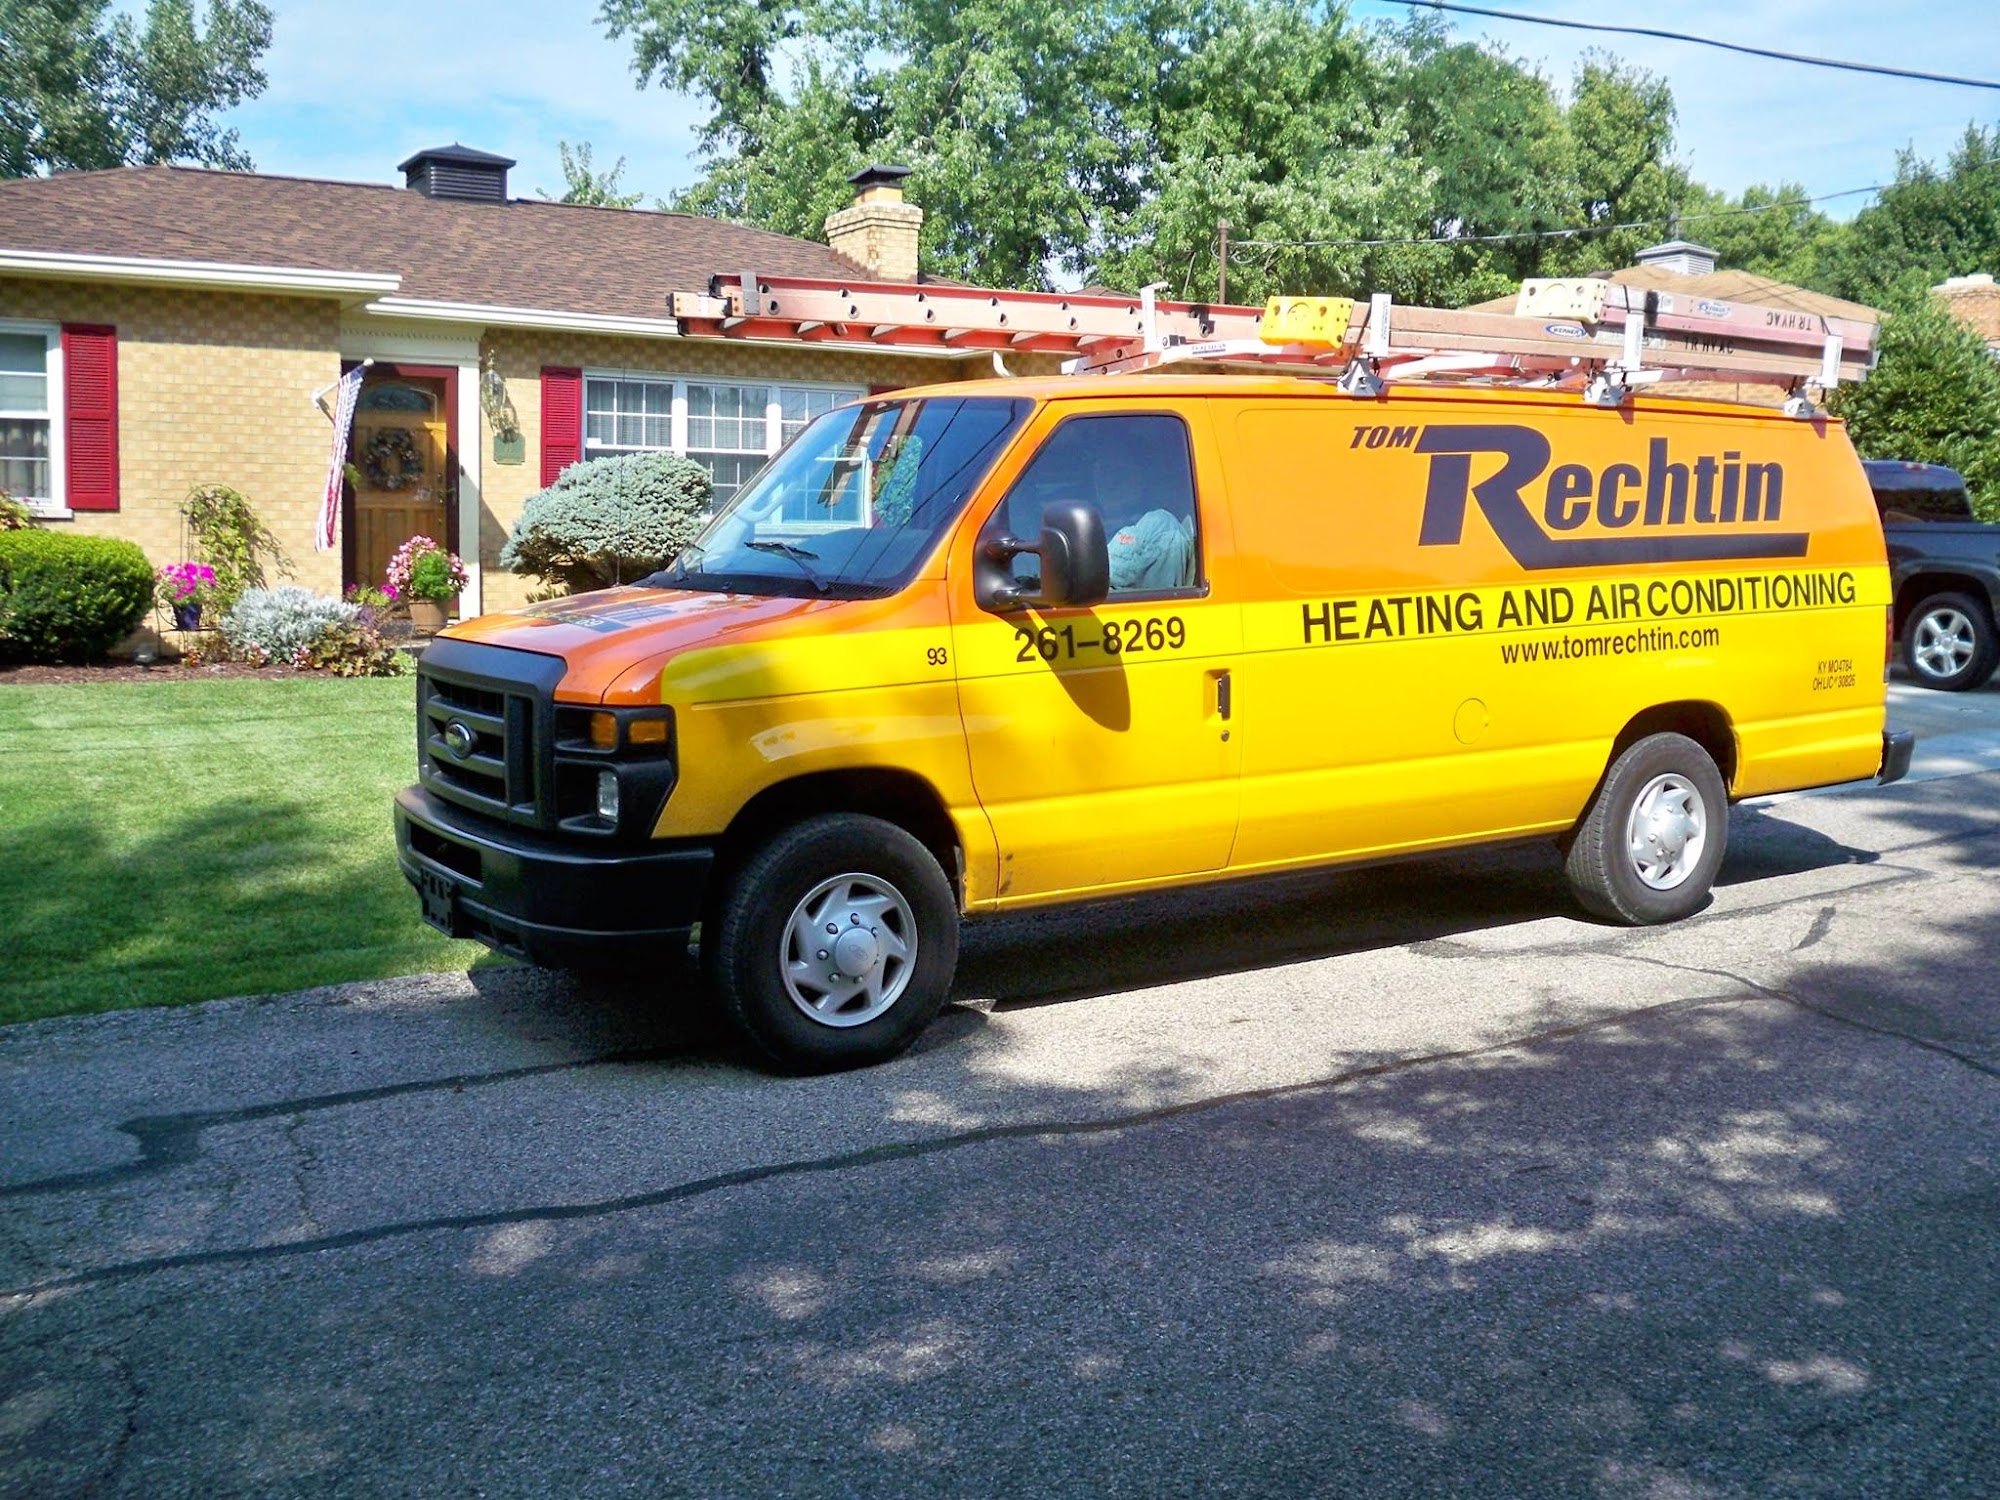 Tom Rechtin Heating & Air Conditioning